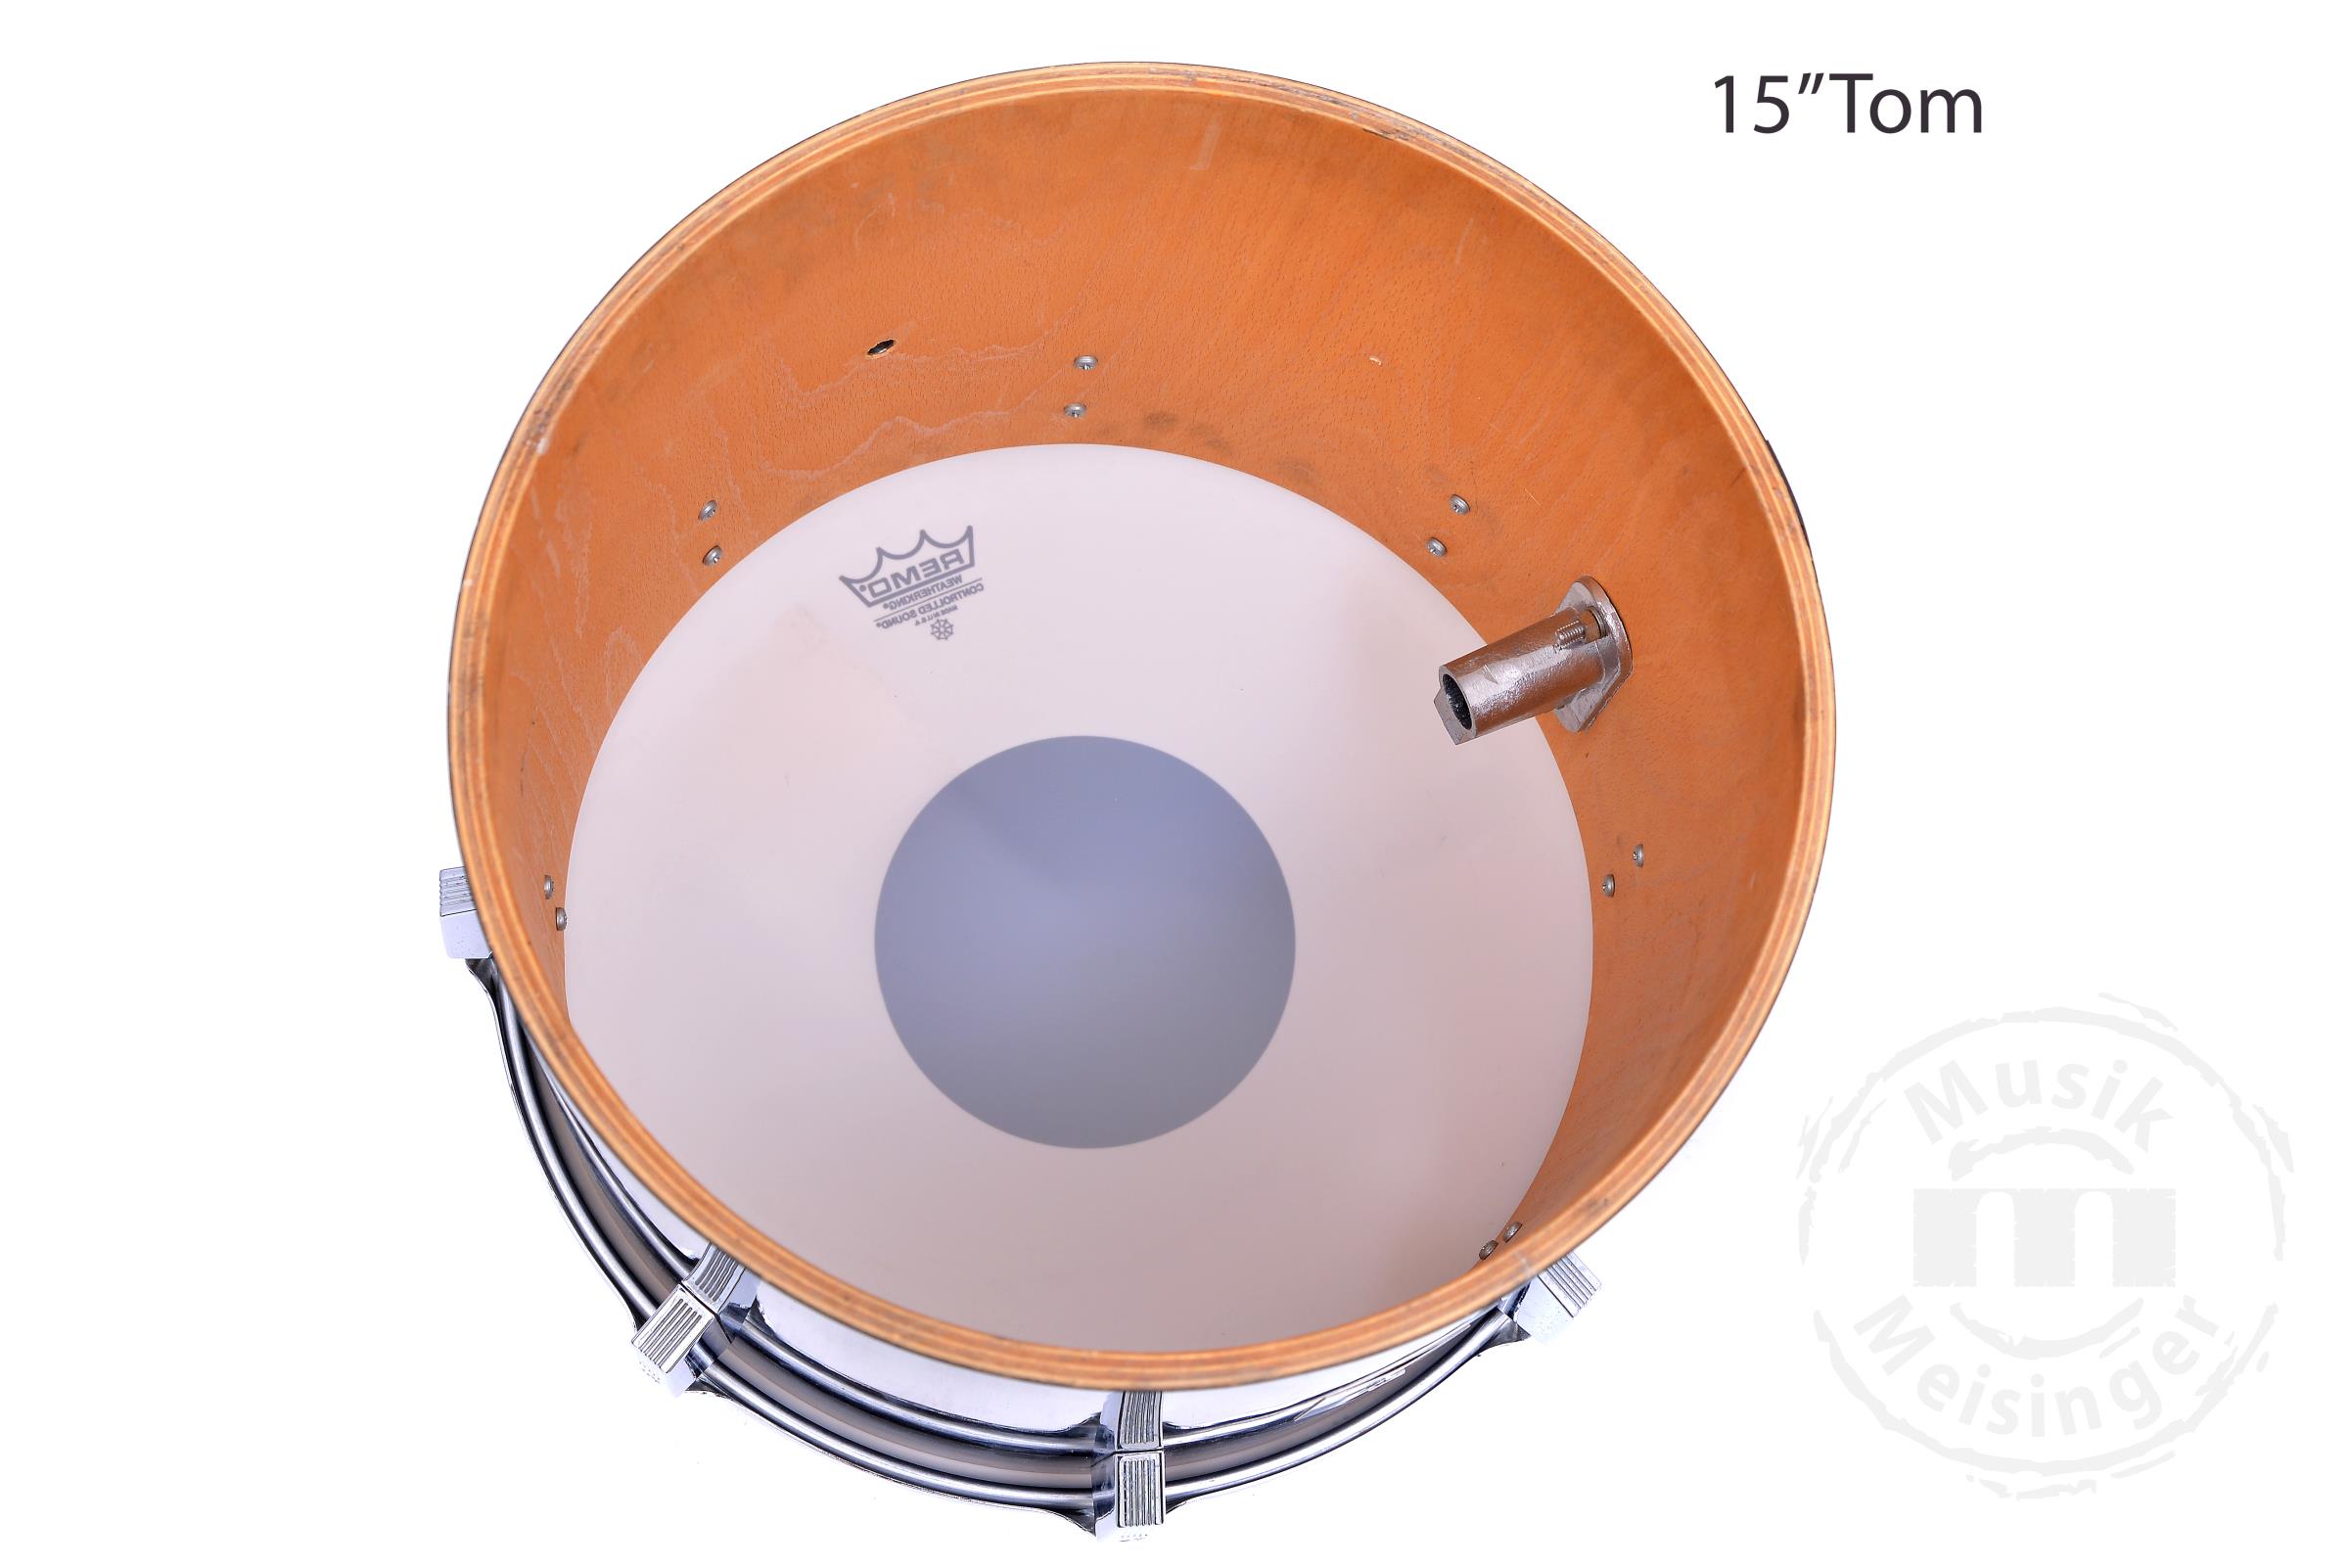 Sonor Phonic 22B +10,12,15 Concert Toms